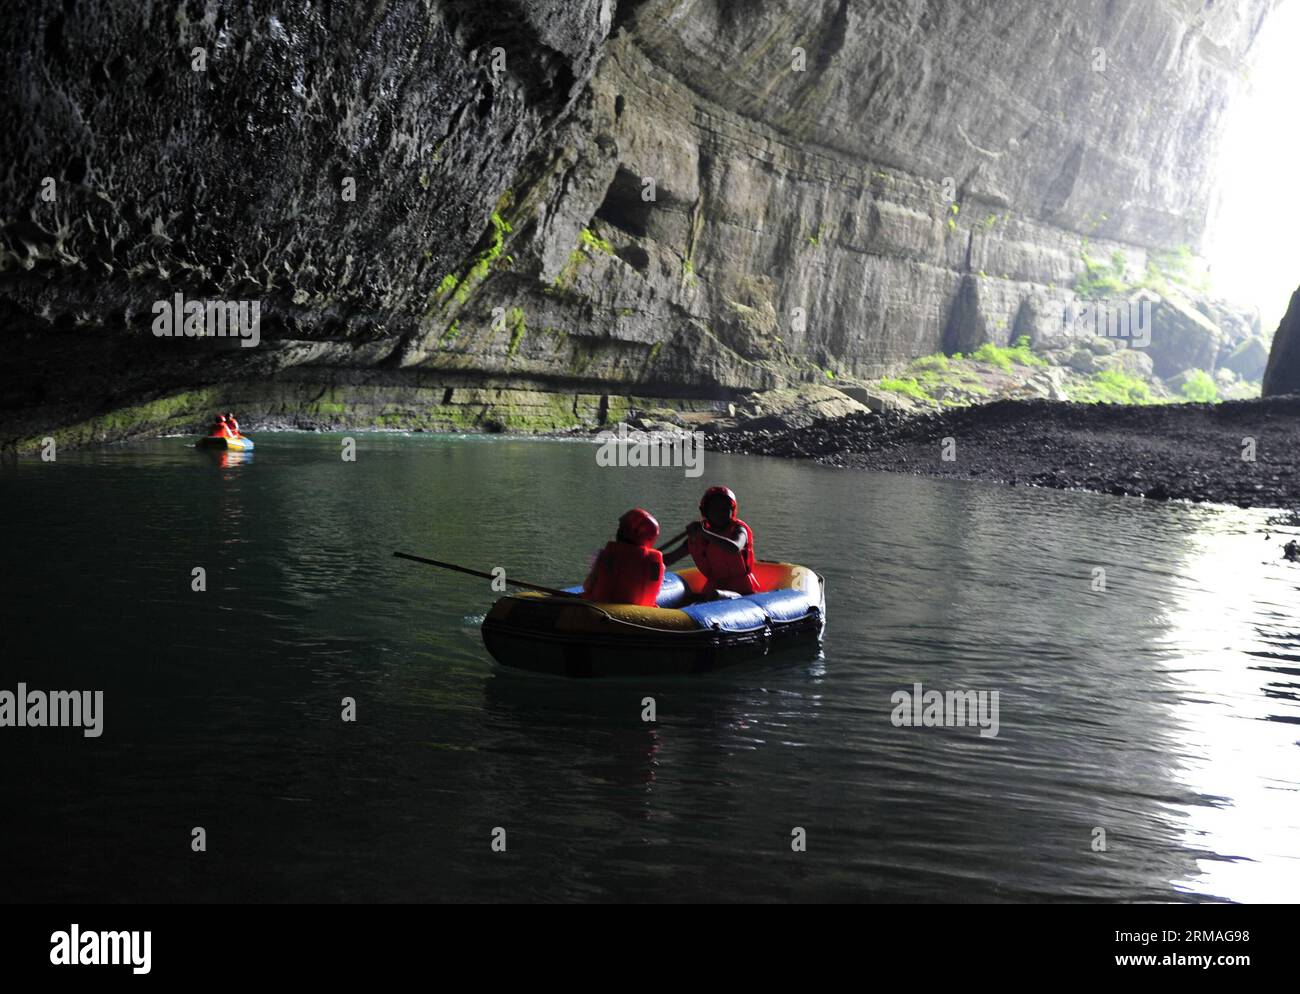 (140708) -- XIANFENG, July 8, 2014 (Xinhua) -- Tourists enjoy rafting in a cave within the Huangjindong Scenic Area in Xianfeng County, central China s Hubei Province, July 8, 2014. Many people sought refuge in whitewater rafting against the summer heat. (Xinhua/Yang Shunpi) (lmm) CHINA-SUMMER-LEISURE-RAFTING (CN) PUBLICATIONxNOTxINxCHN   Xian Feng July 8 2014 XINHUA tourists Enjoy Rafting in a Cave Within The  Scenic Area in Xian Feng County Central China S Hubei Province July 8 2014 MANY Celebrities sought Refuge in Whitewater Rafting against The Summer Heat XINHUA Yang Shunpi lmm China Summ Stock Photo